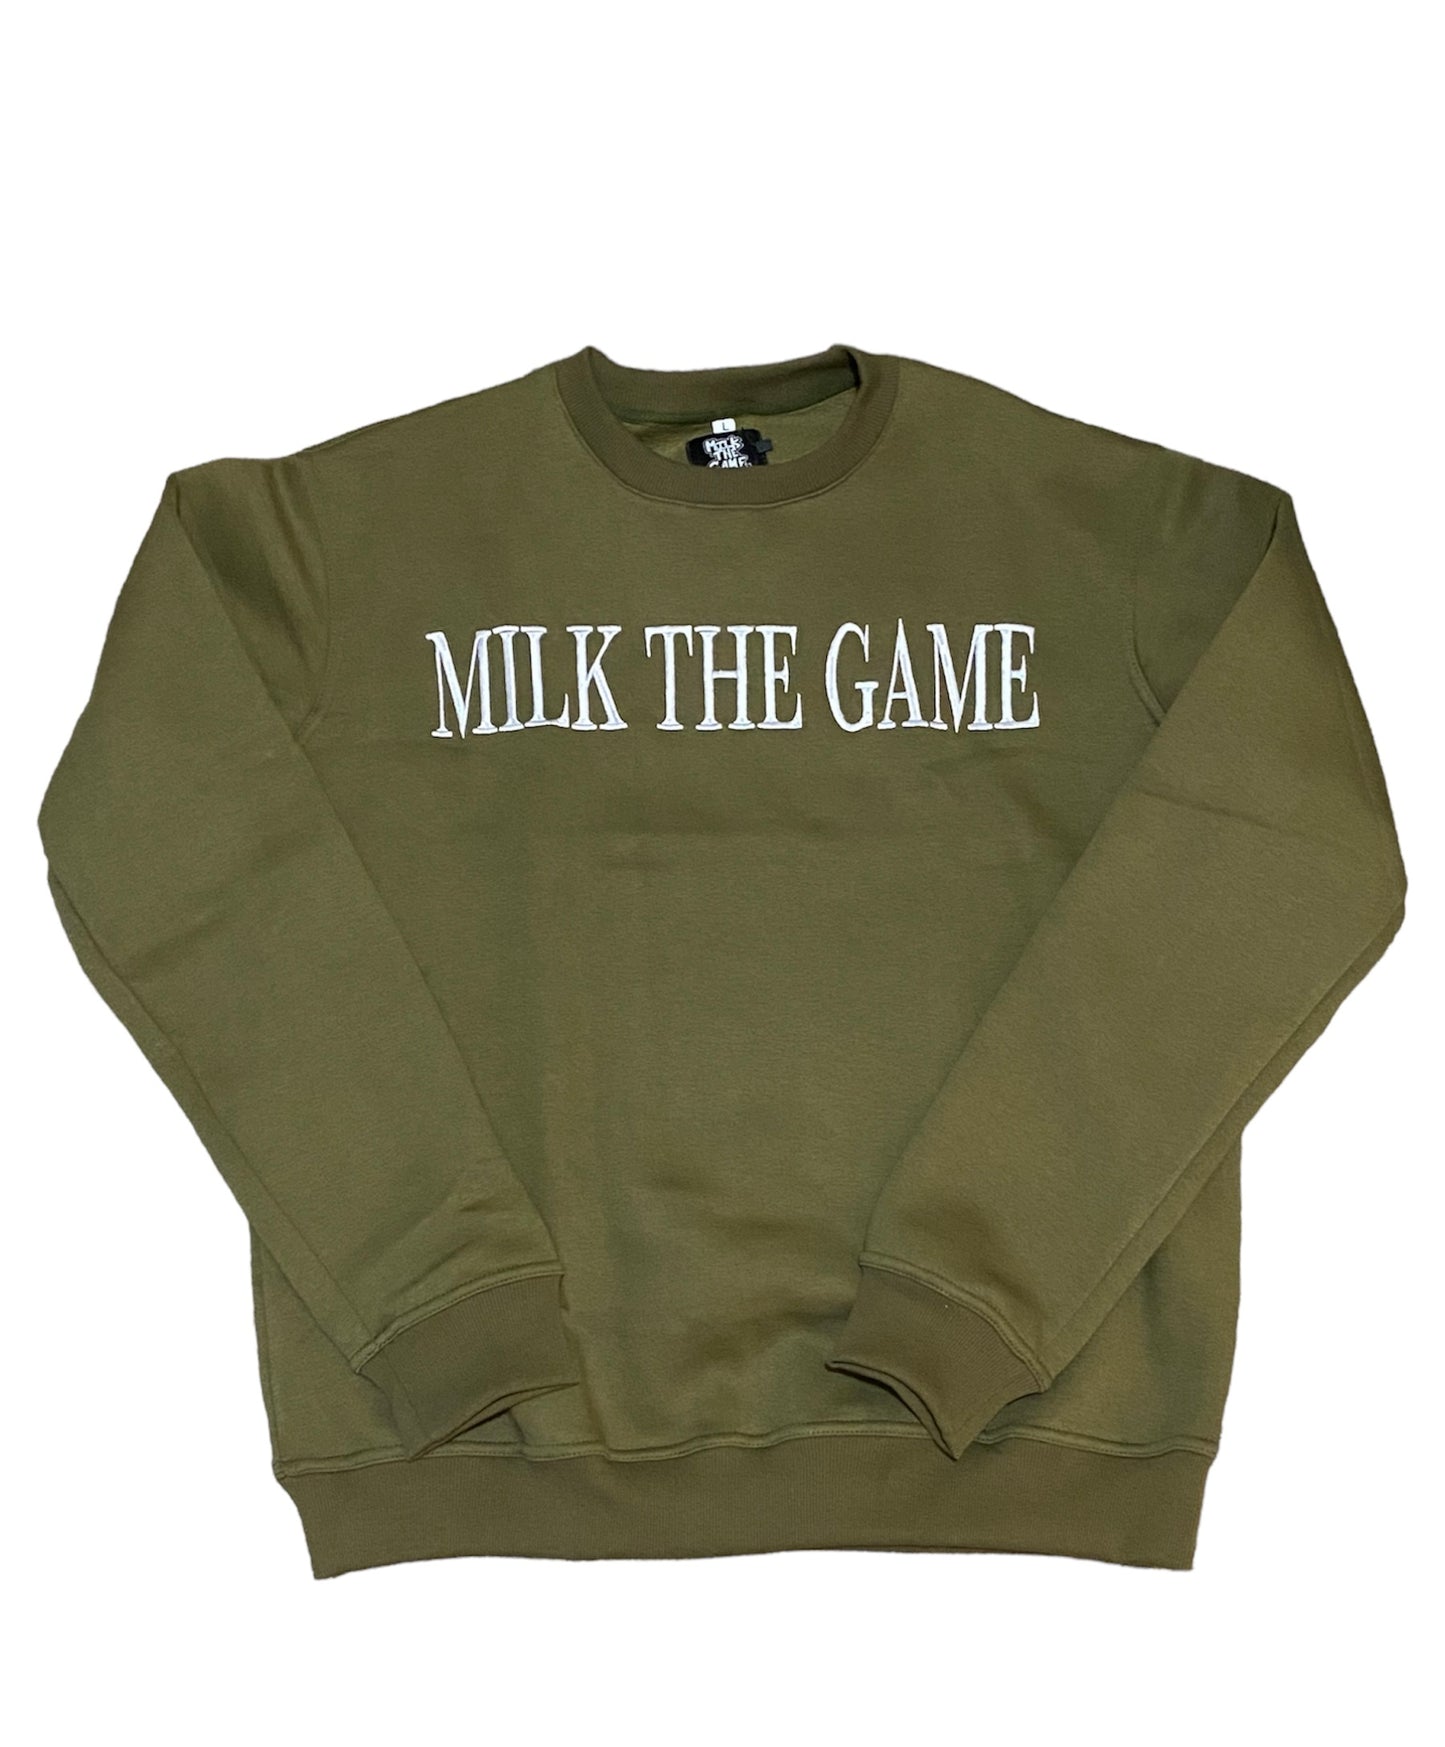 Olive green Lucid sweater